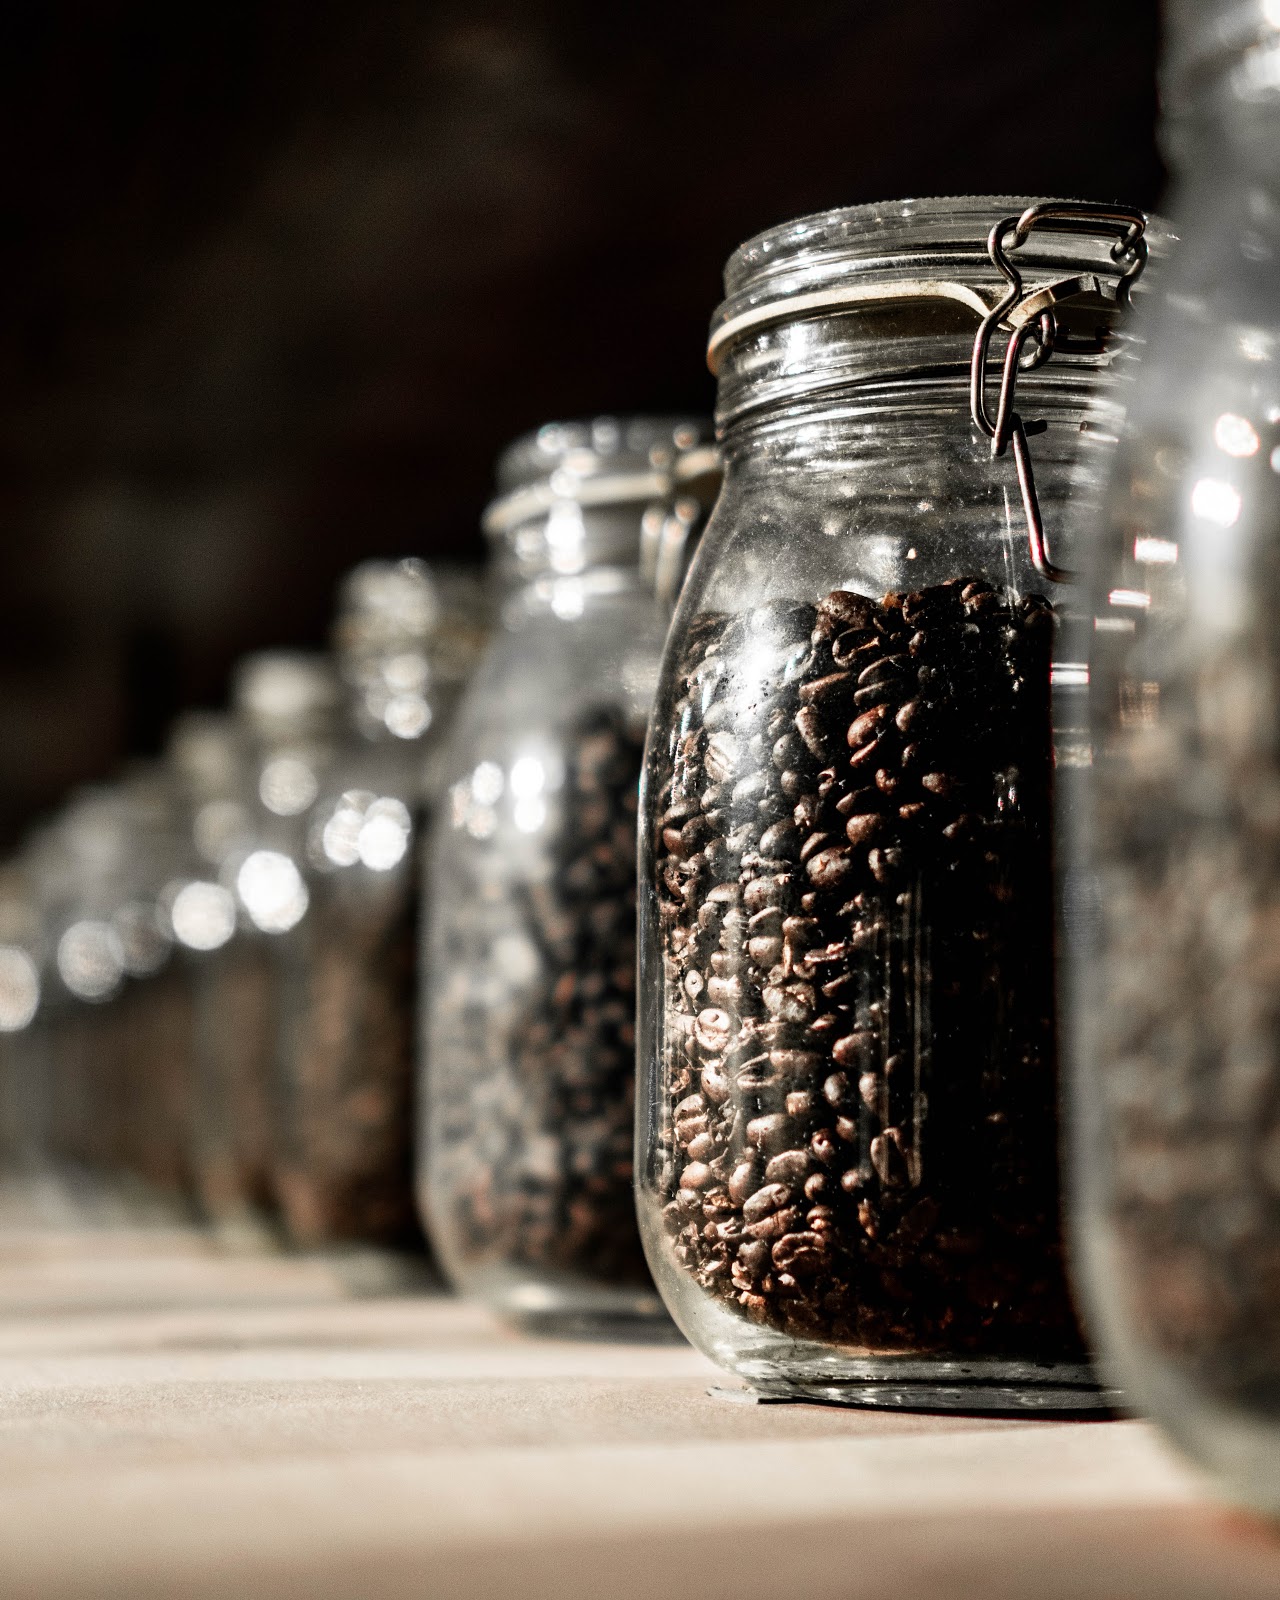 Roasted coffee beans stored in a glass jar